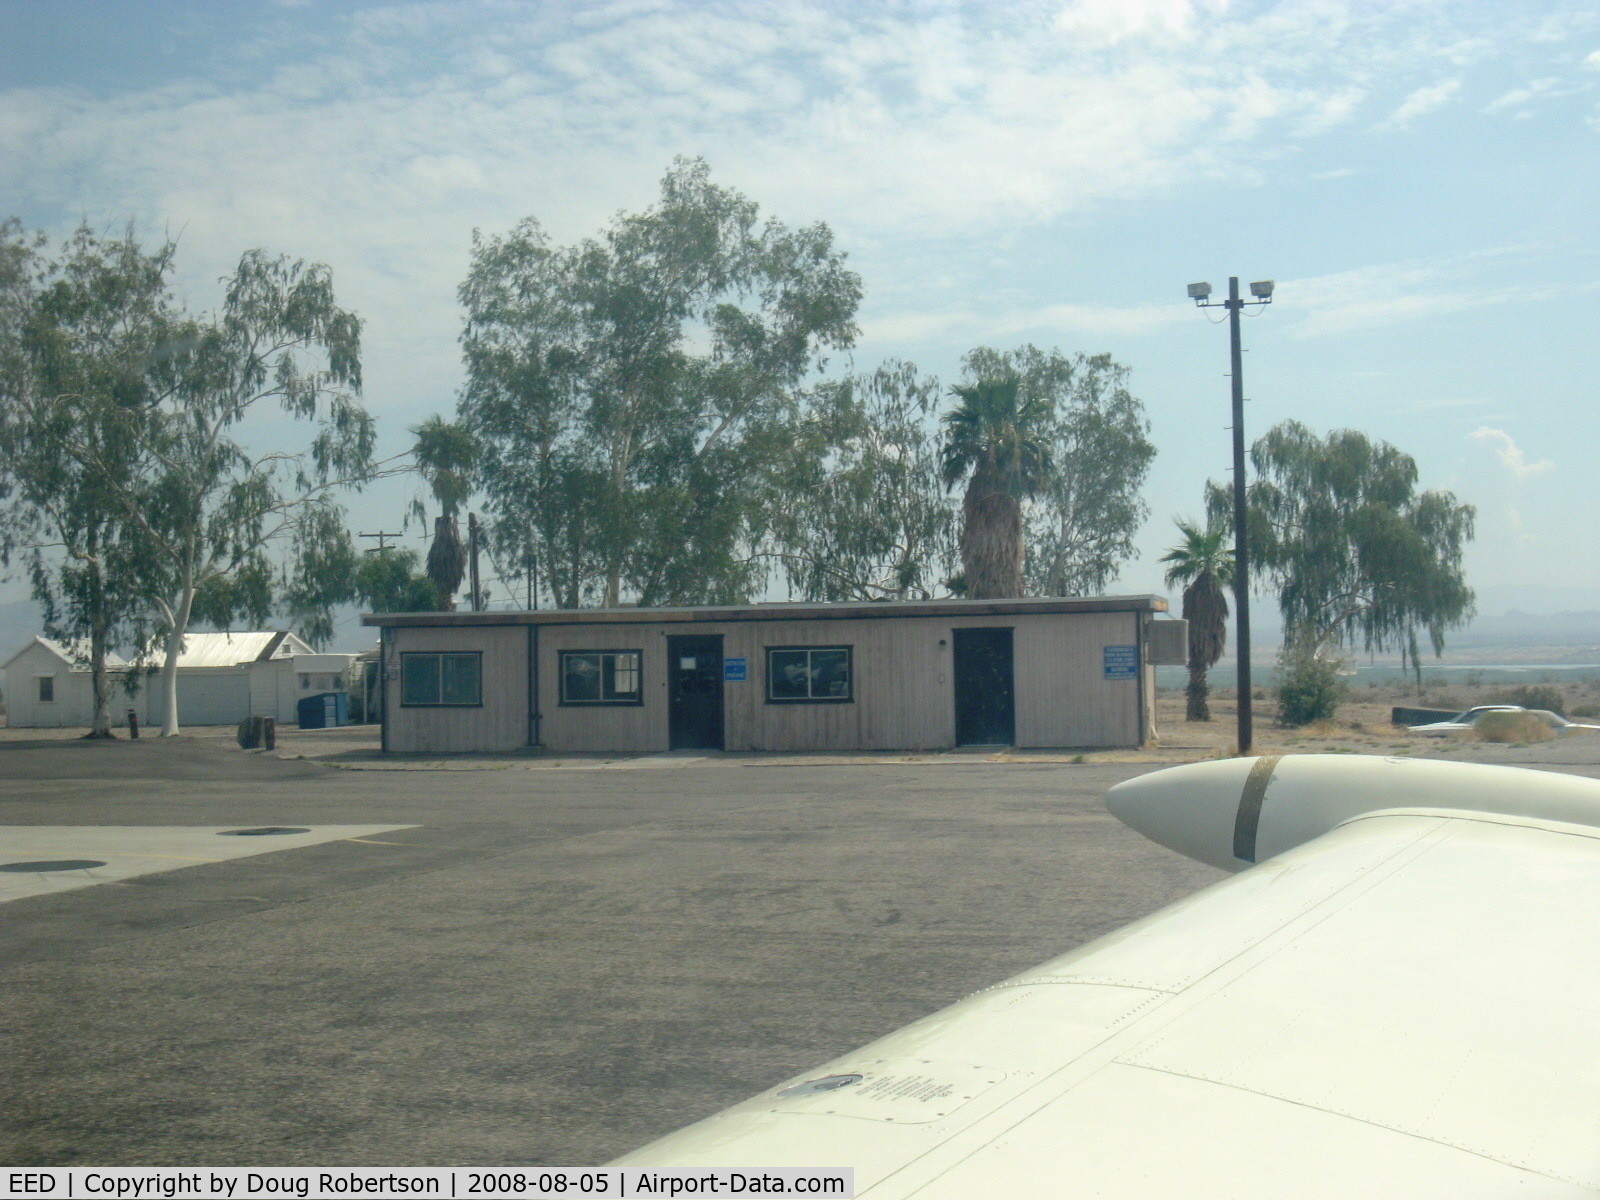 Needles Airport (EED) - Terminal Bldg. Phone to Riverside FSS, toilets and flight-planning tables